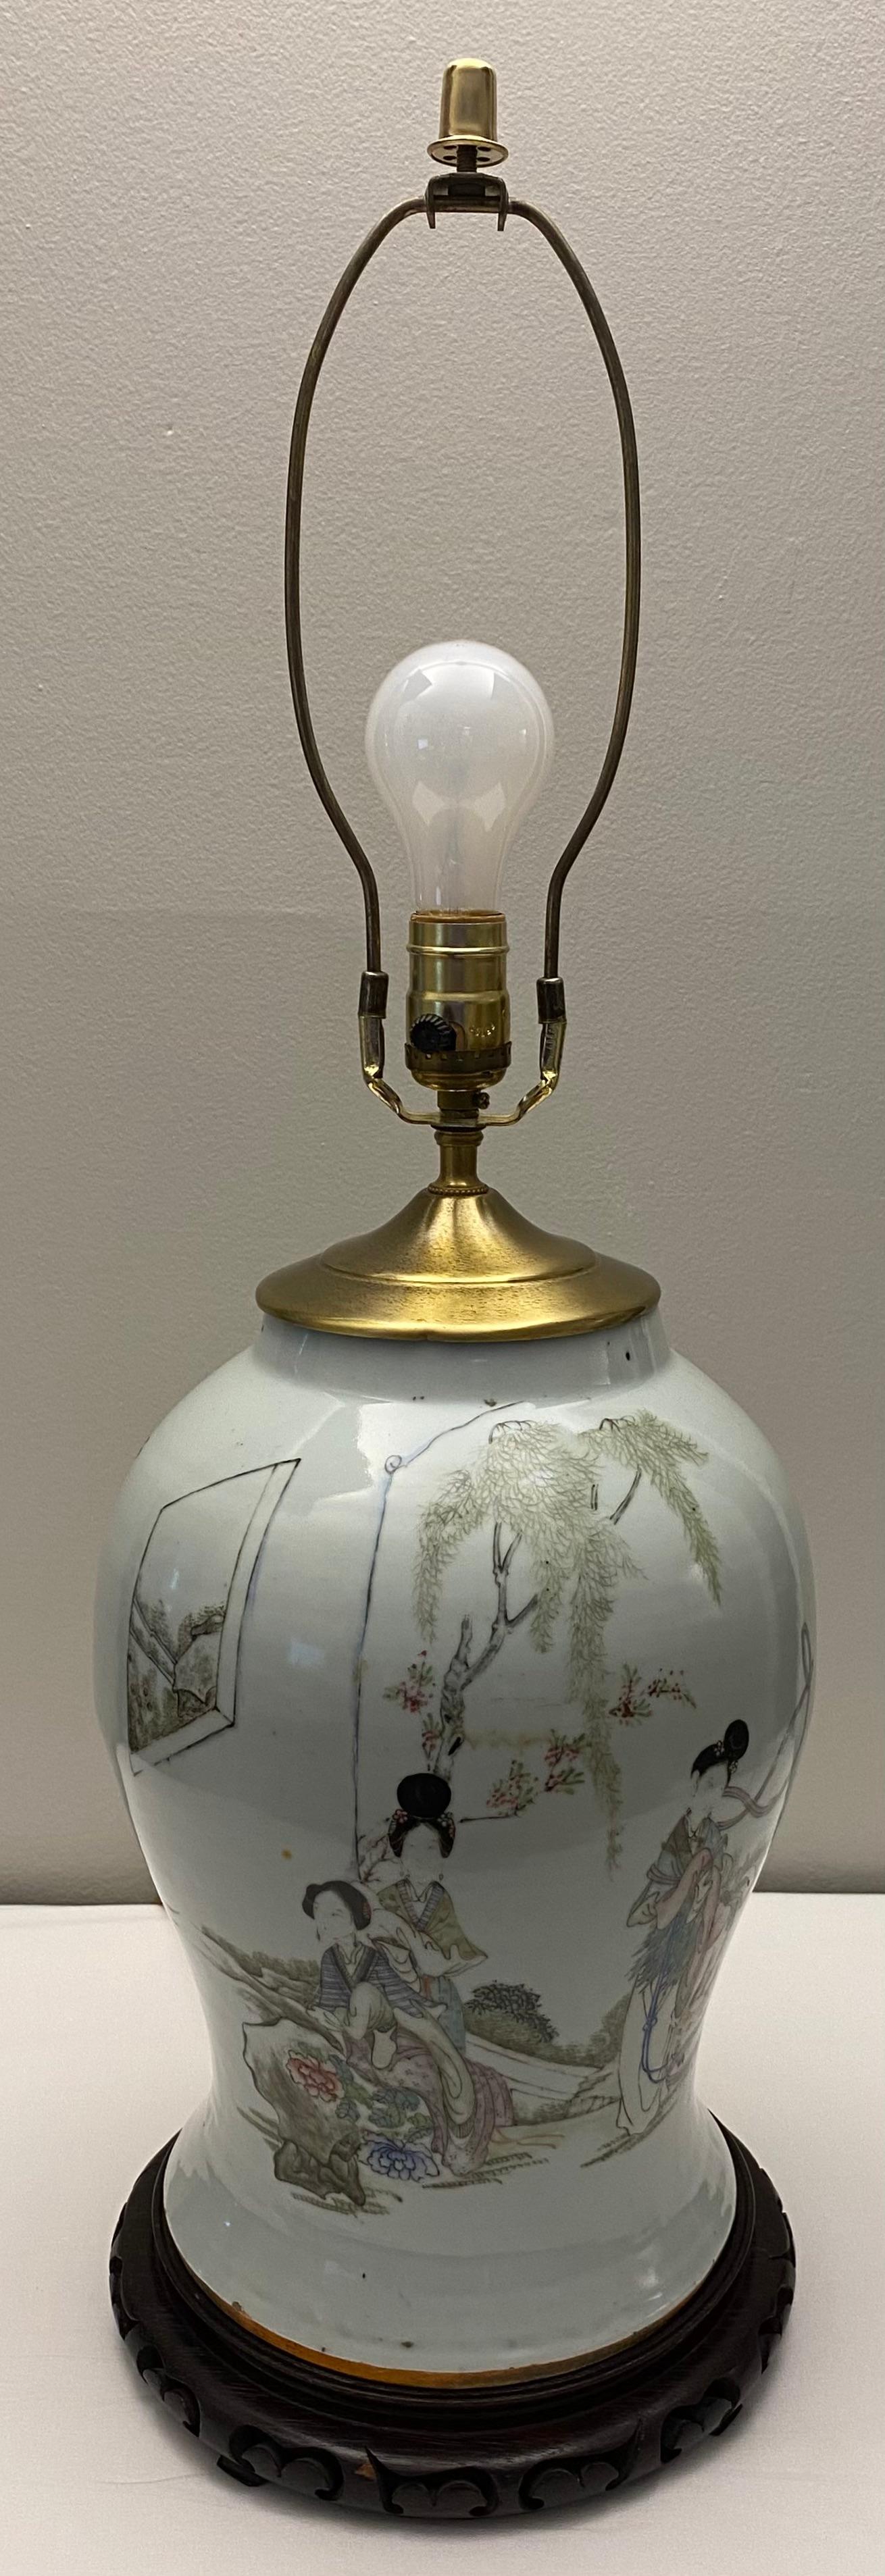 Hand-Painted Rare Large 19th Century Chinese Porcelain Pale Blue Bulbous Vase Lamp For Sale